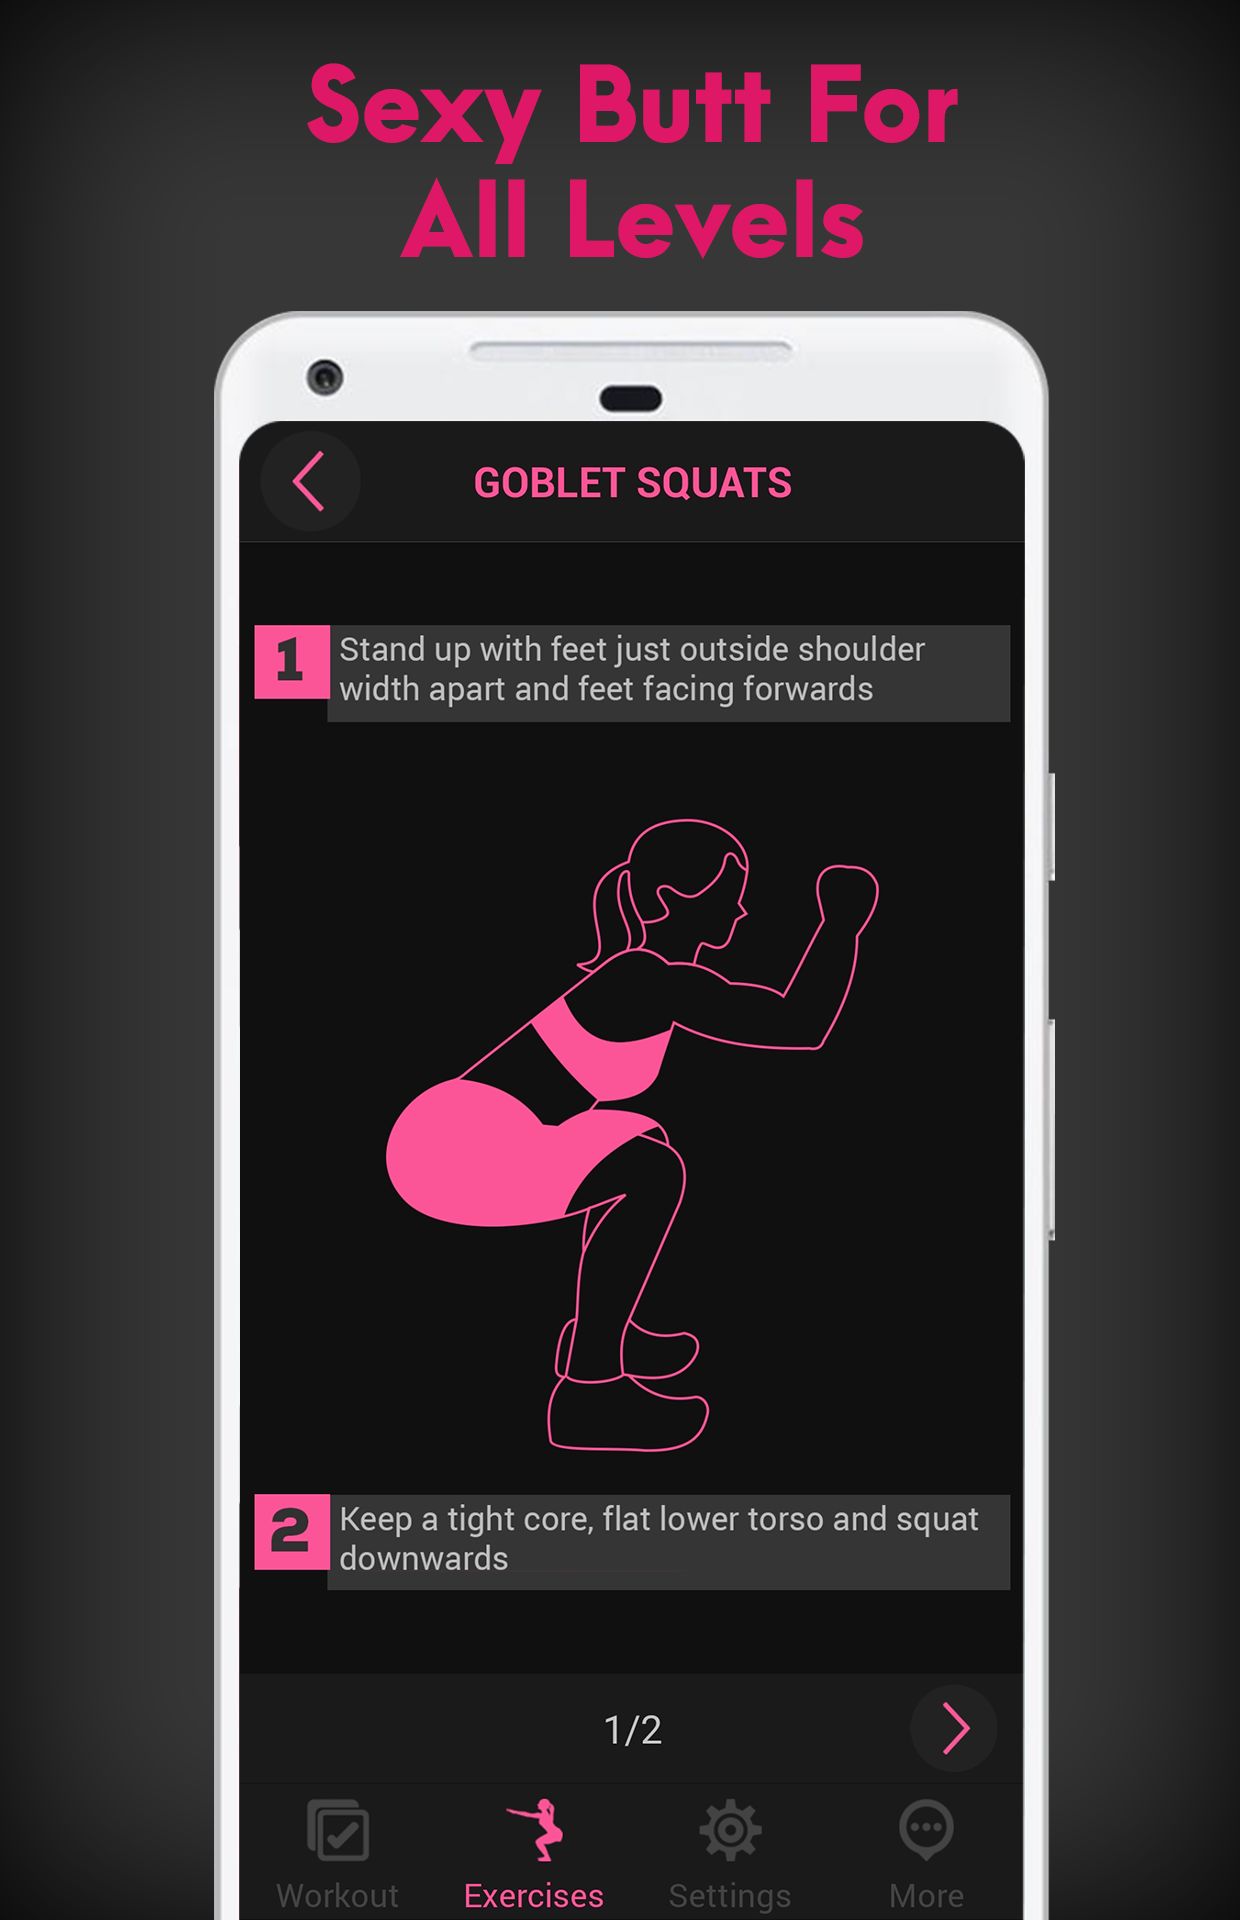 Women Workout - Android App Template by Vocsy | Codester